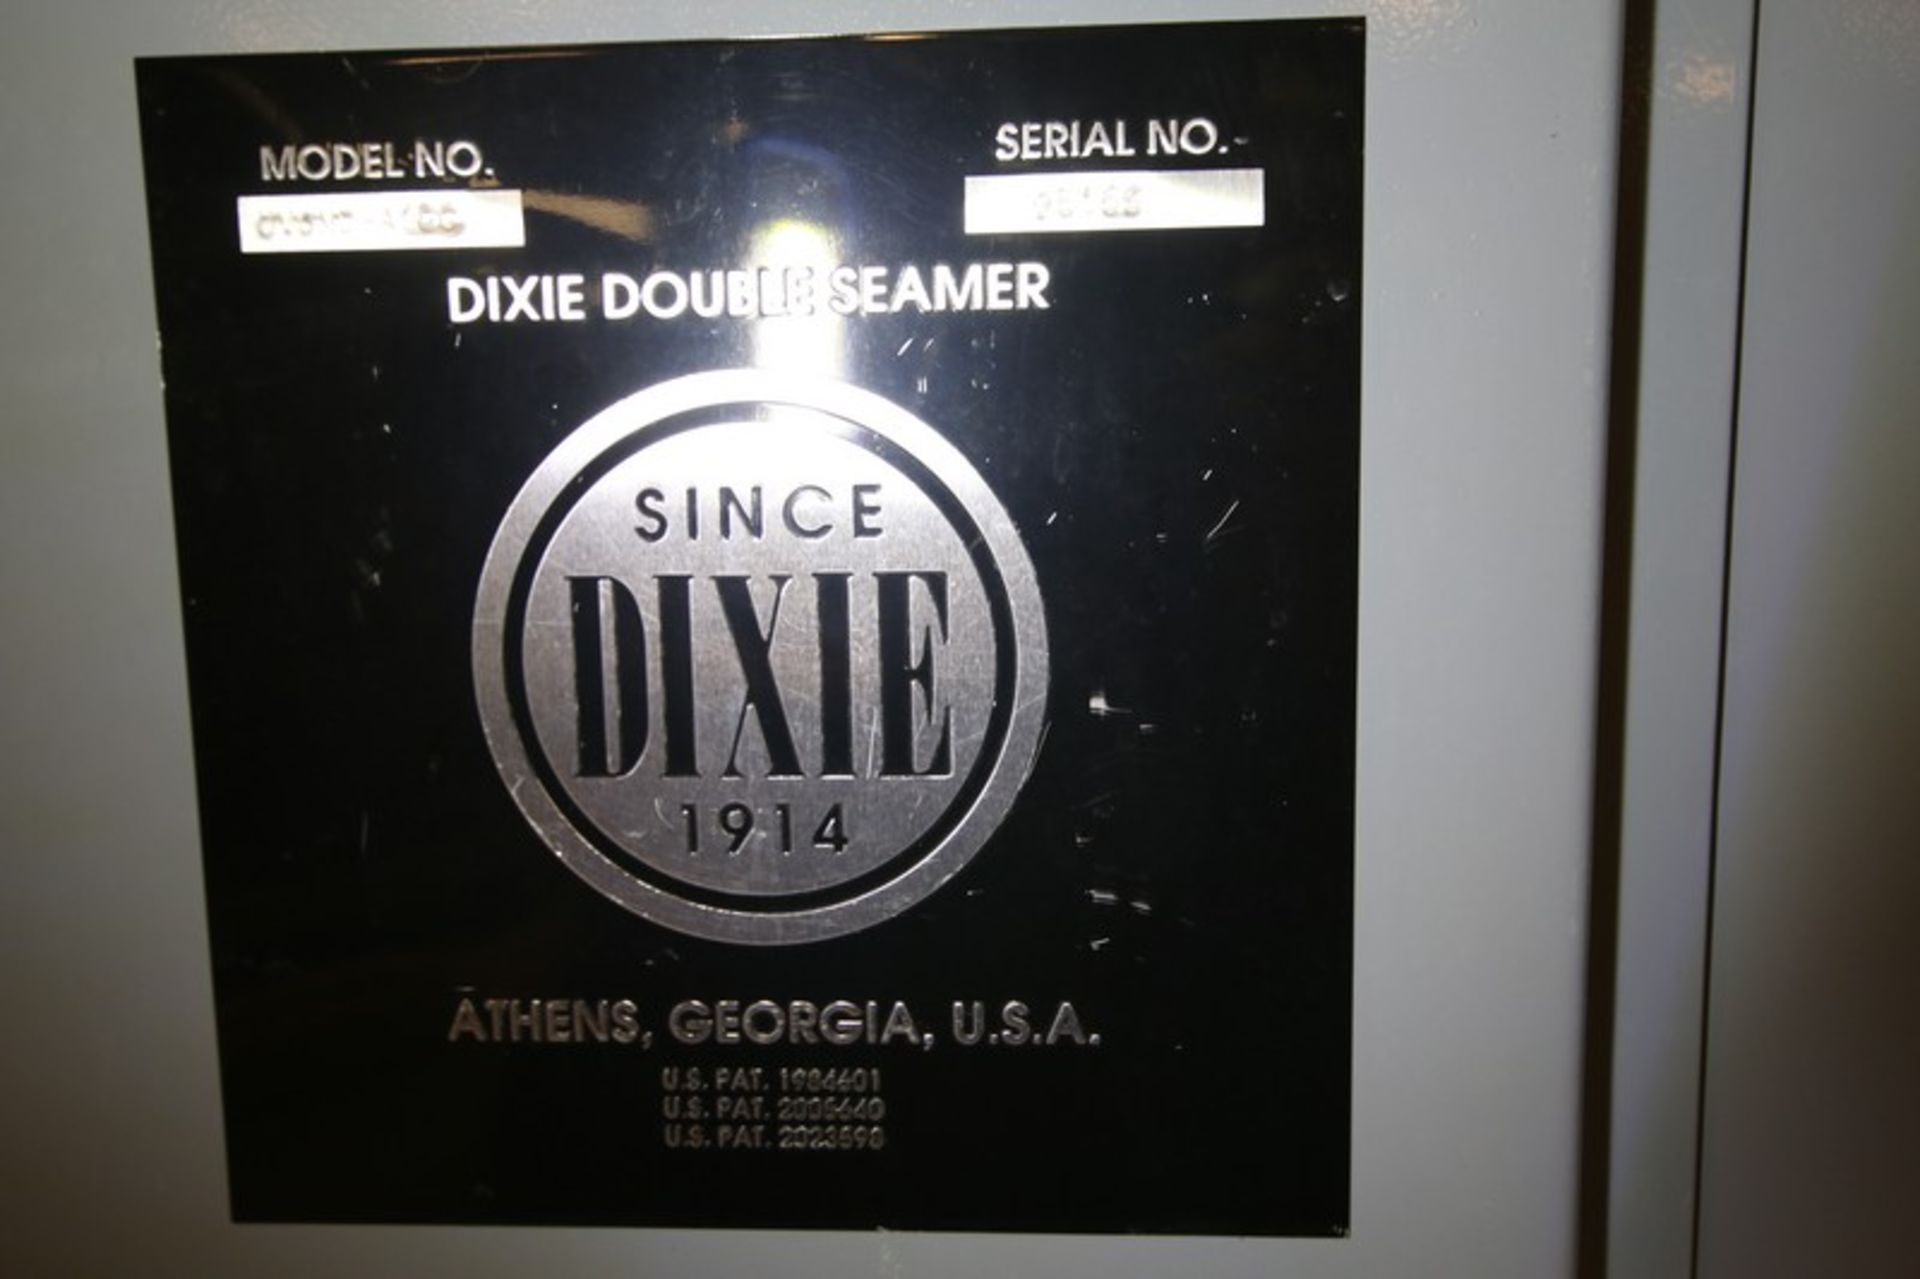 Dixie Double Can Seamer, Model UVGMD-ALCC, SN 95166, Busch On Board Vacuum Pump, 110/115V, Idec - Image 14 of 14